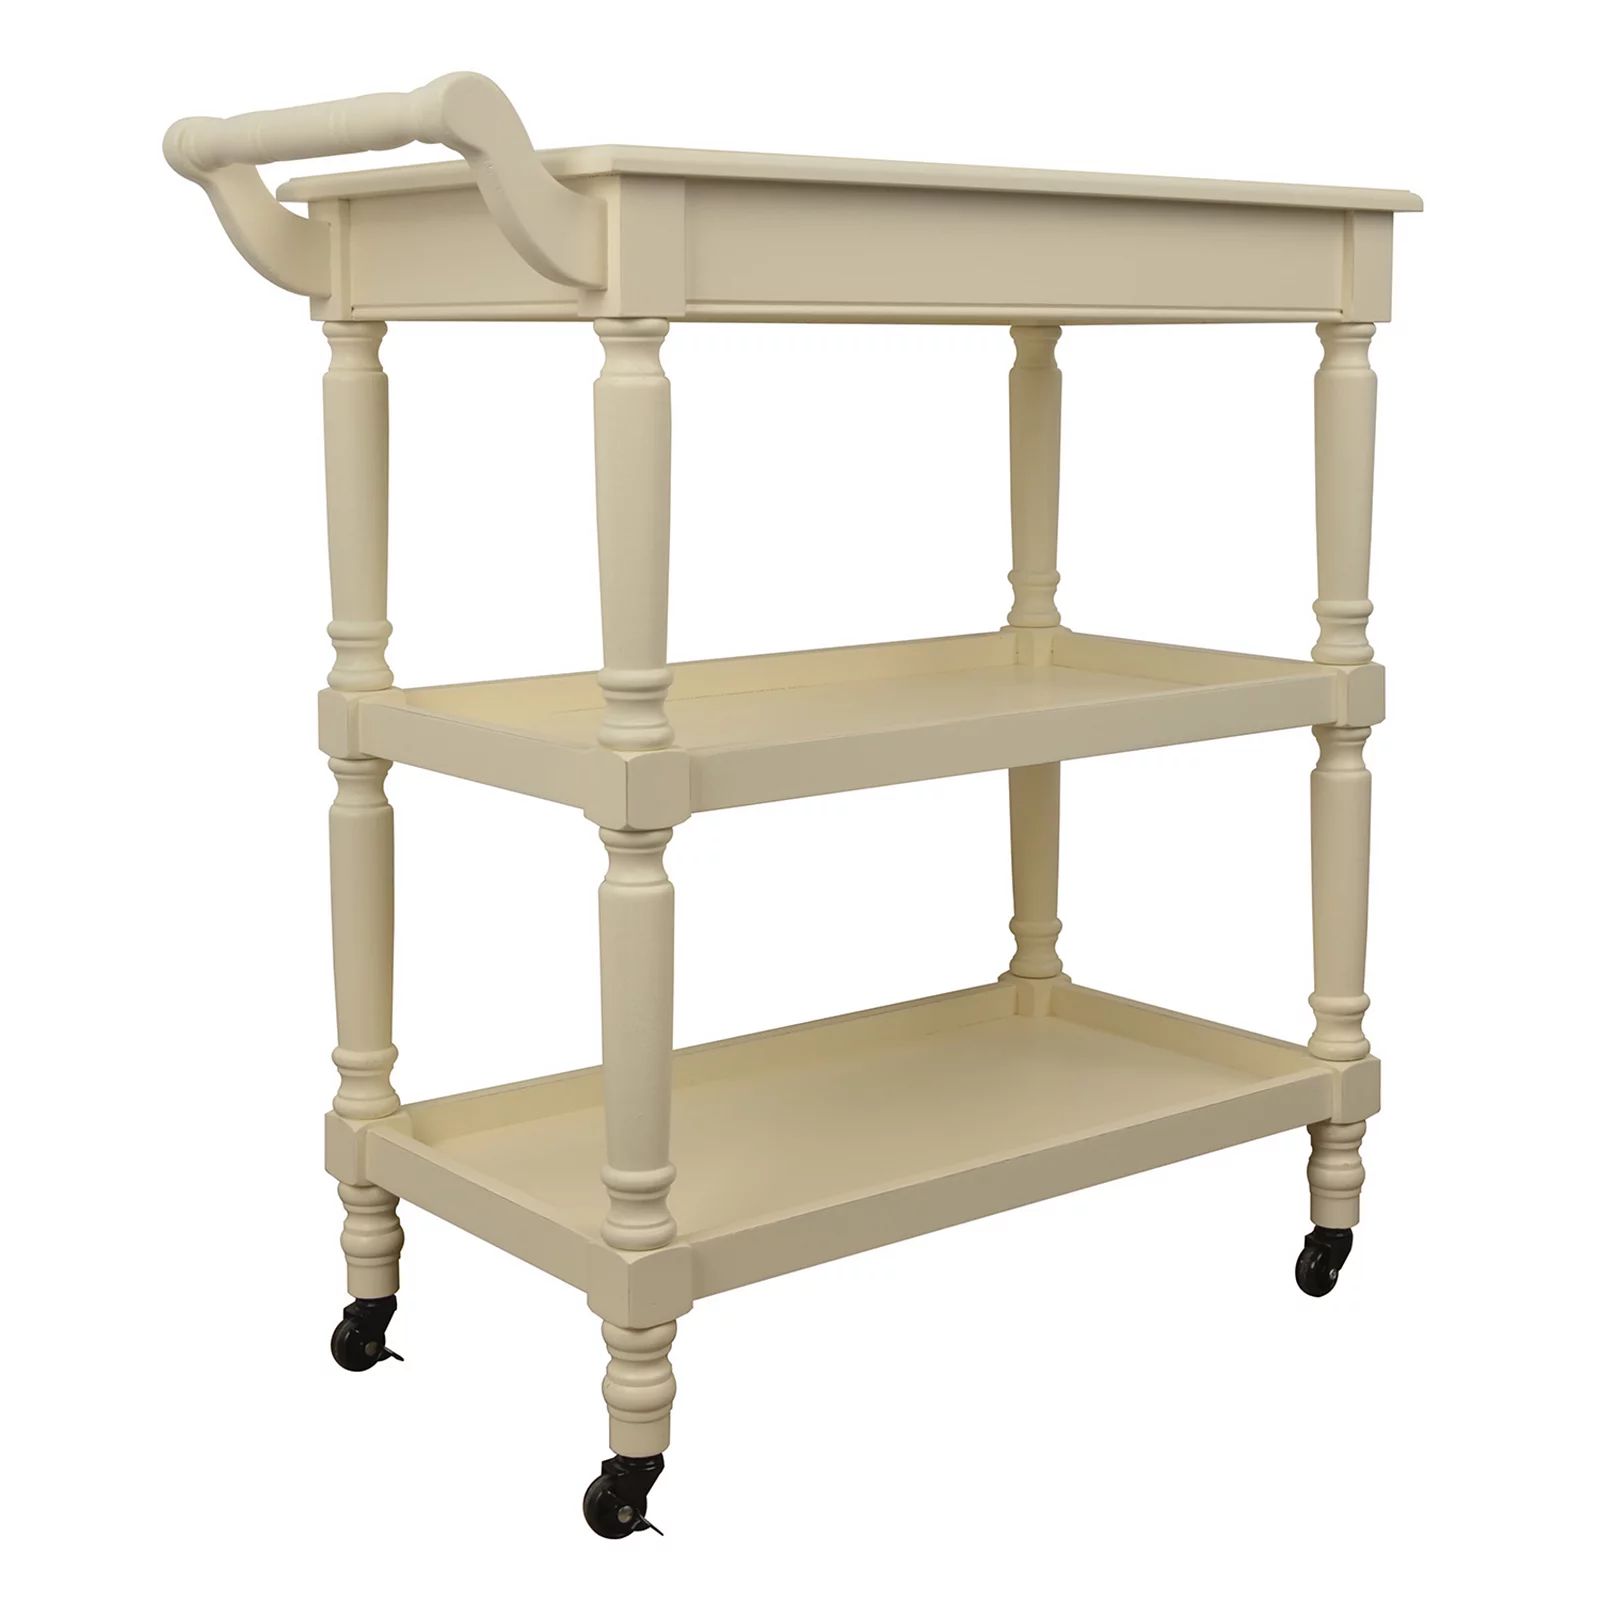 Decor Therapy Traditional Rolling Bar Cart, White | Kohl's